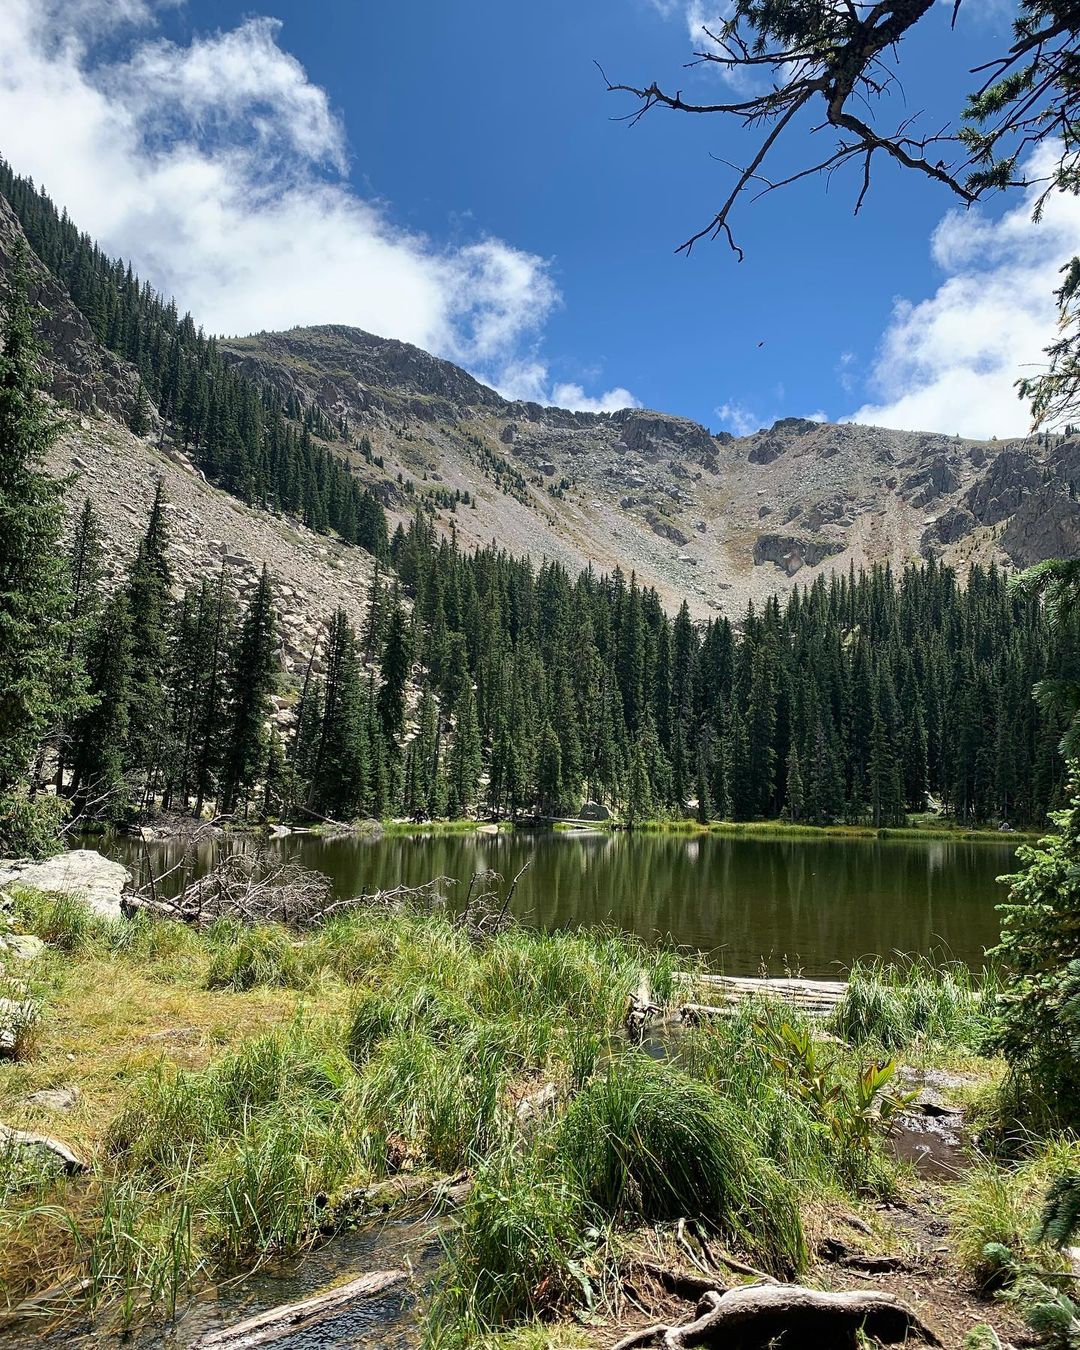 Nambe Lake surrounded by trees and mountains. Photo by Instagram user @leeenterprises.